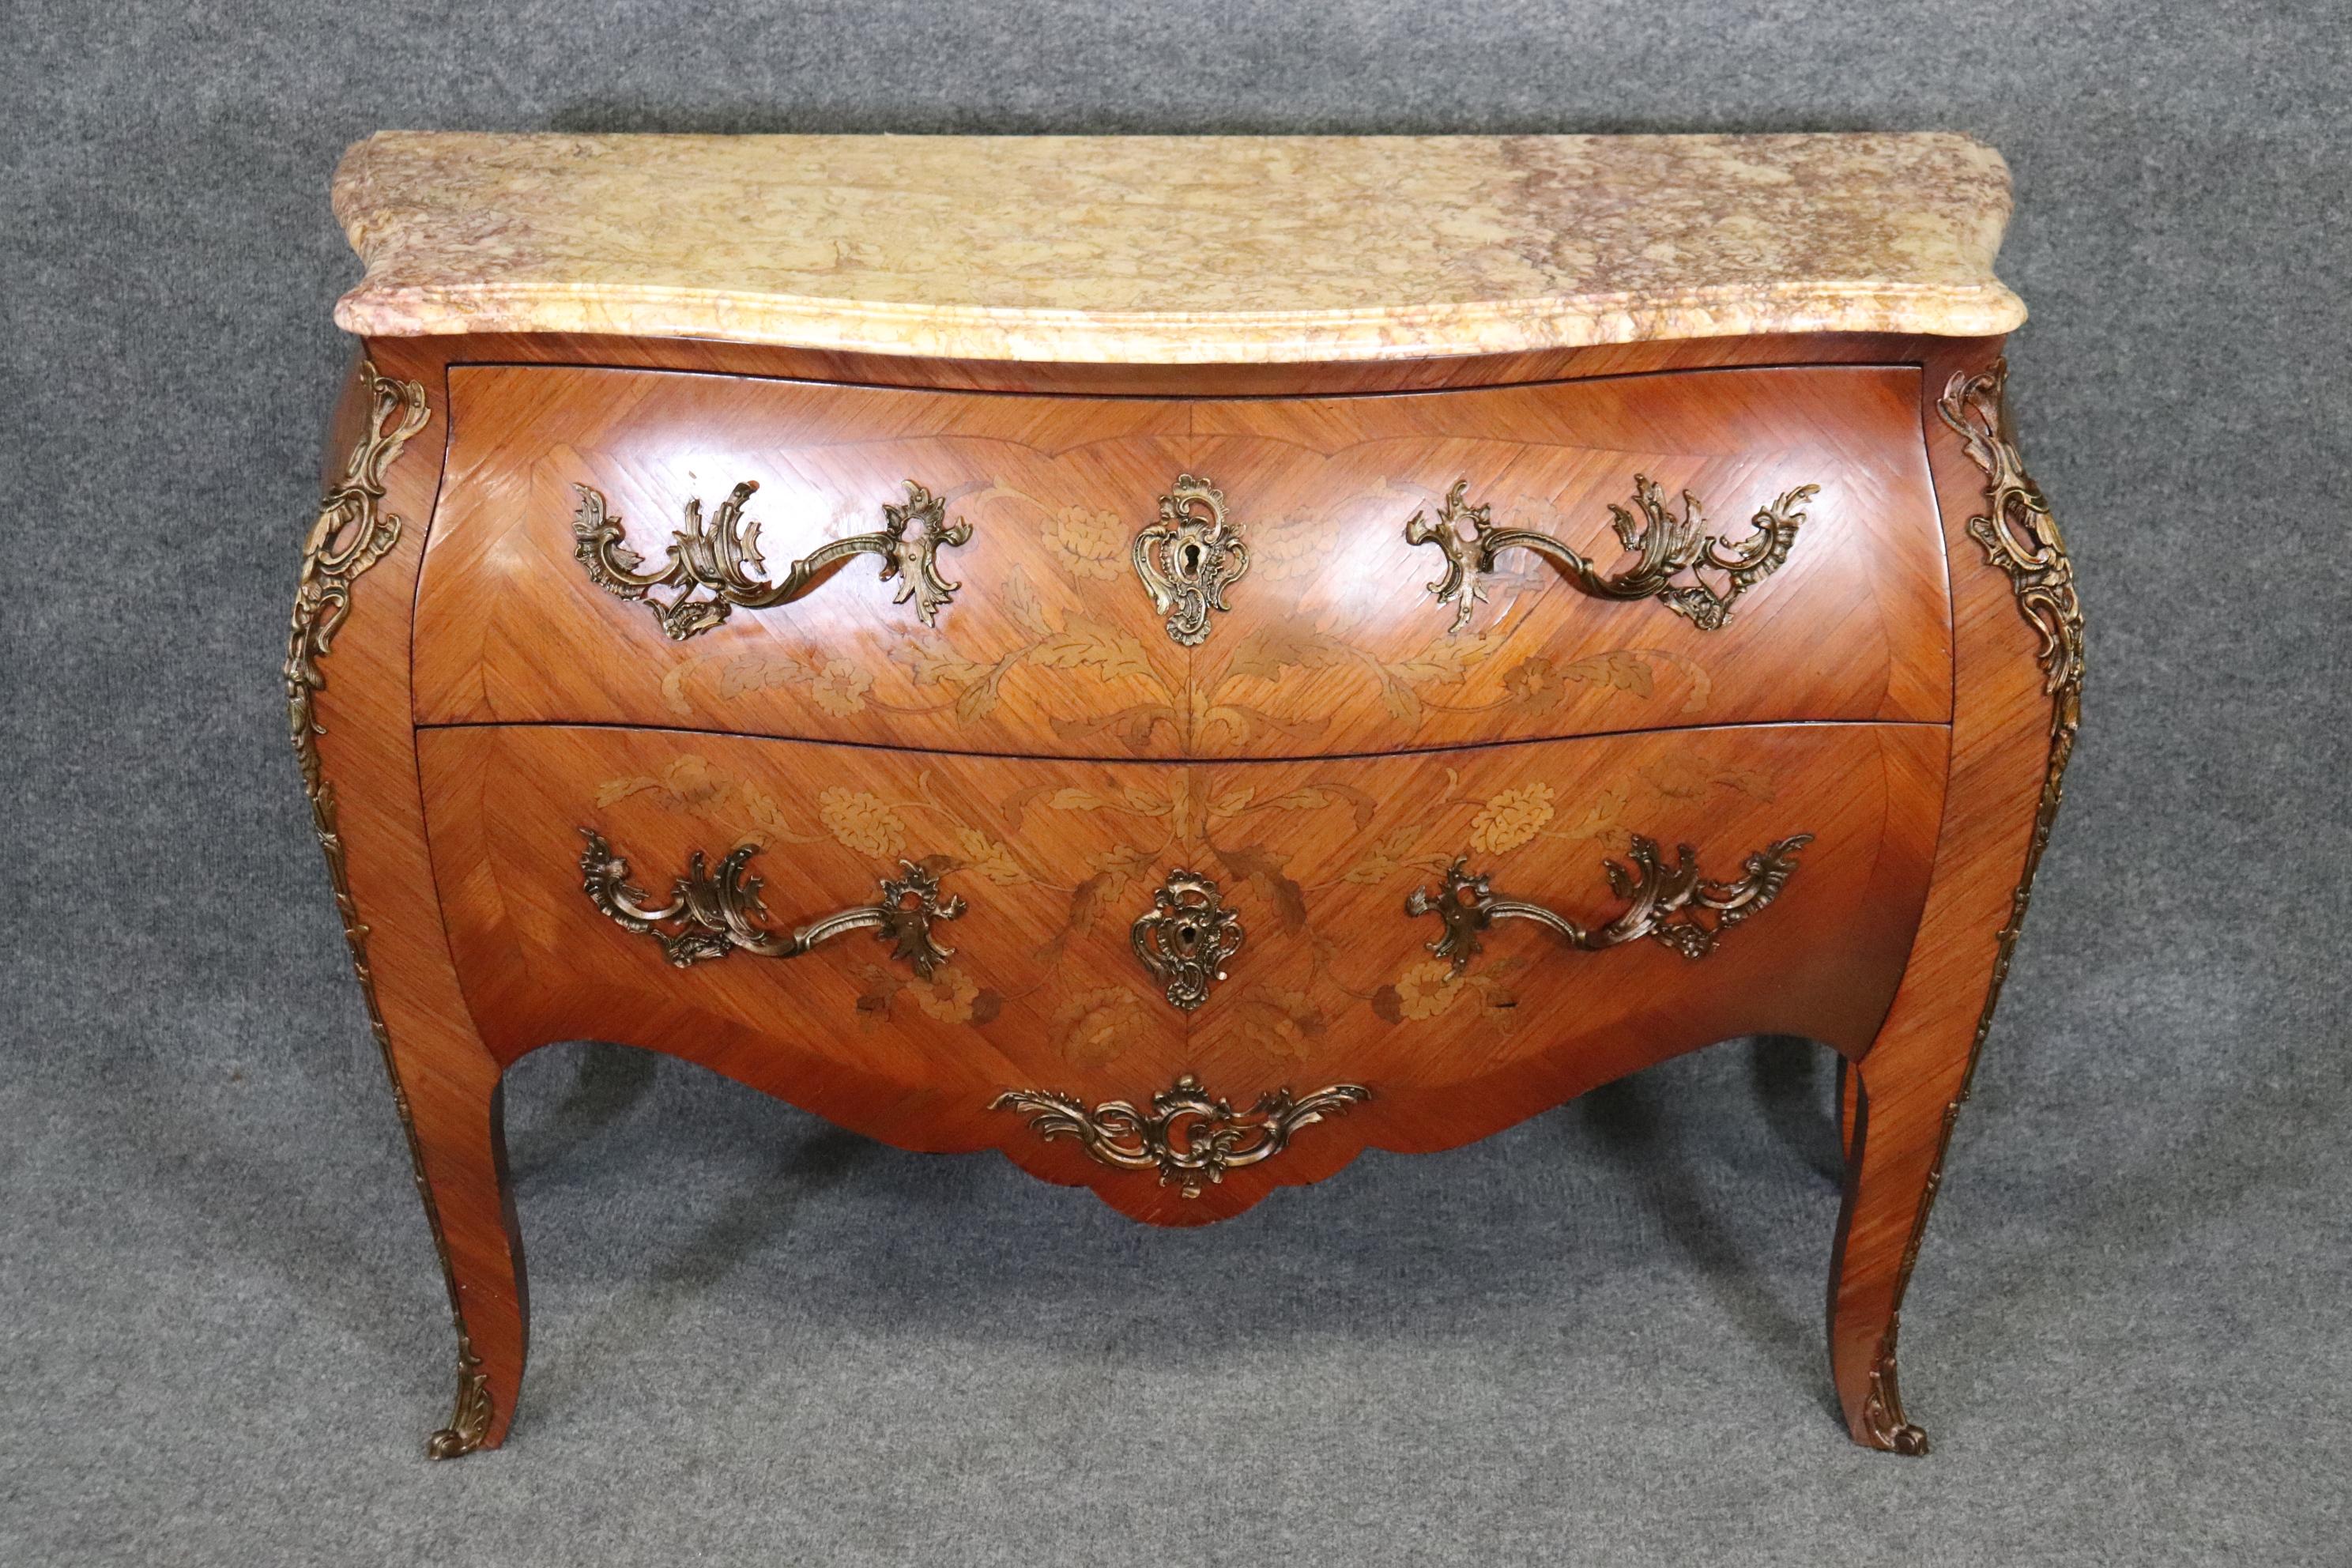 This is a stunning piece of French Louis XV style furniture with the best marble top and gorgeous beefy bronze omorlu and inlay. The marble top is that gorgeous lavender to yellow marble top. The case is inlaid in mixed woods and made of satinwood.